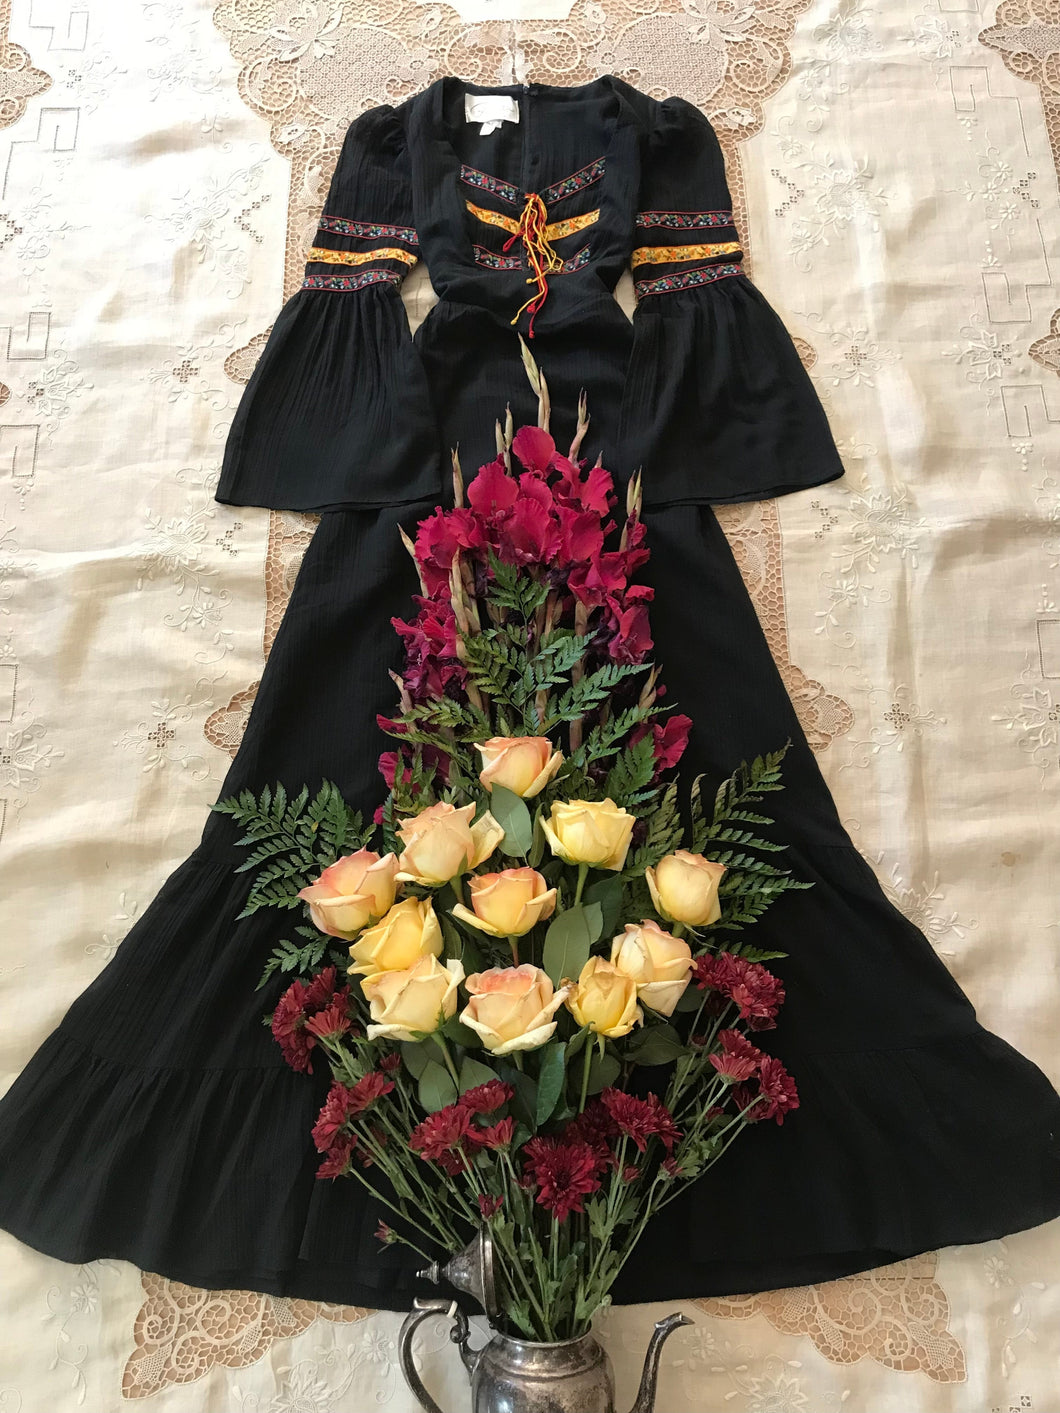 Authentic 1970's vintage dress by Roberta